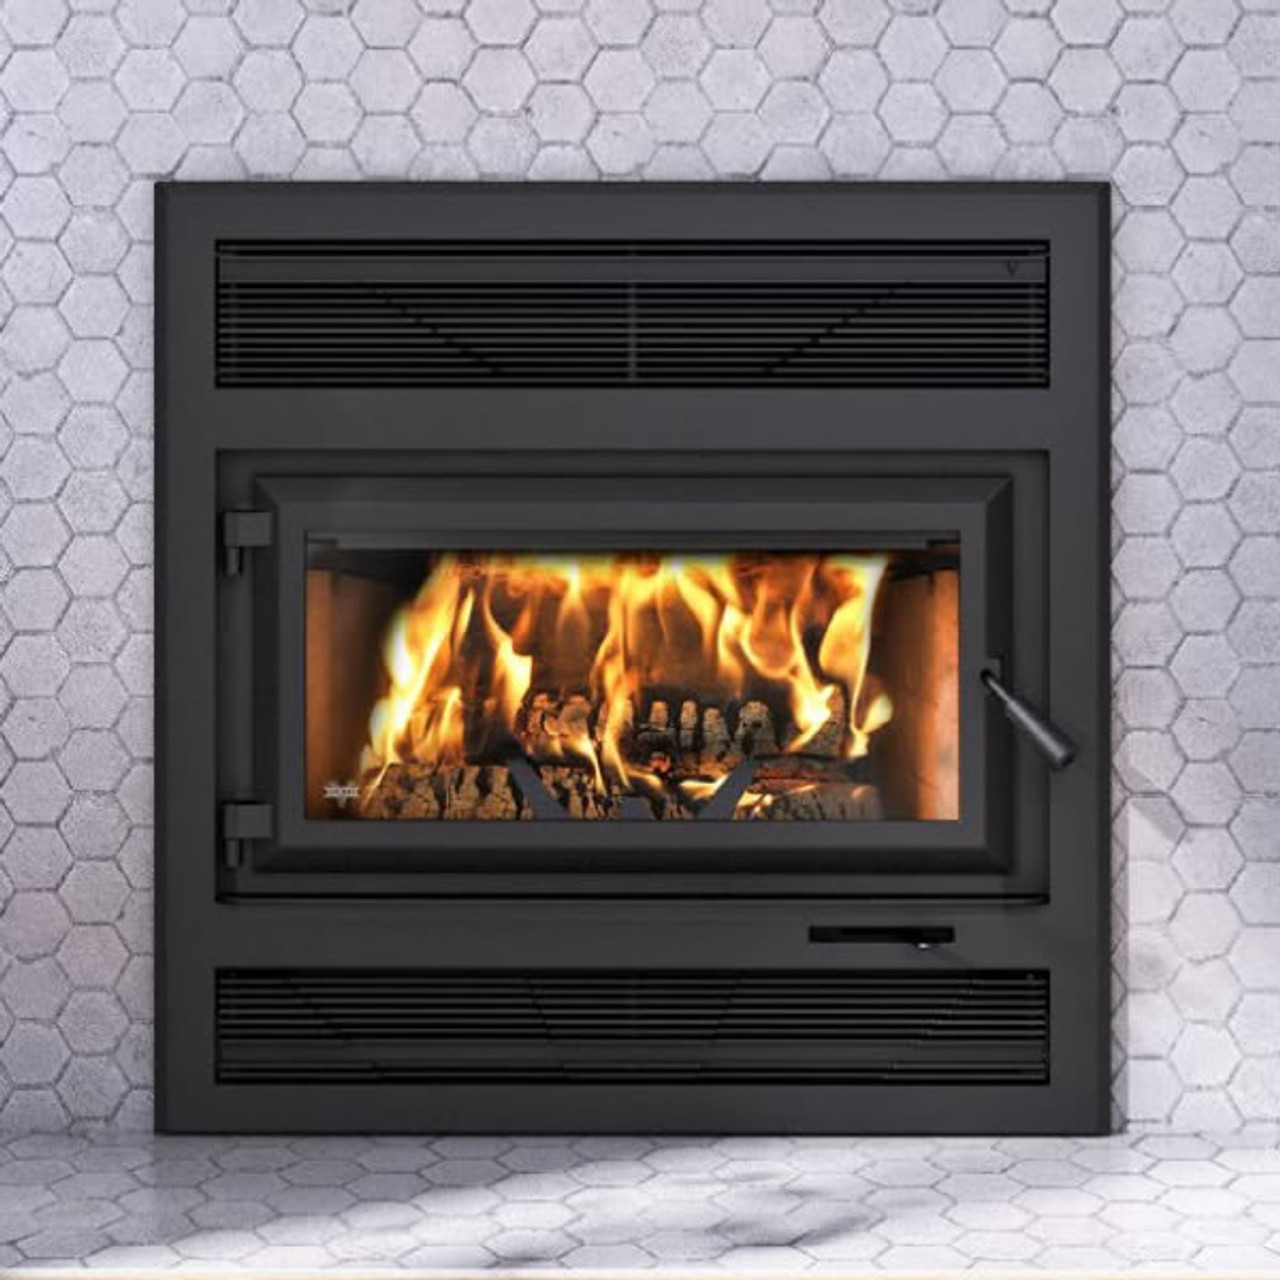 Ventis HE250R ZC Wood Fireplace with Blower